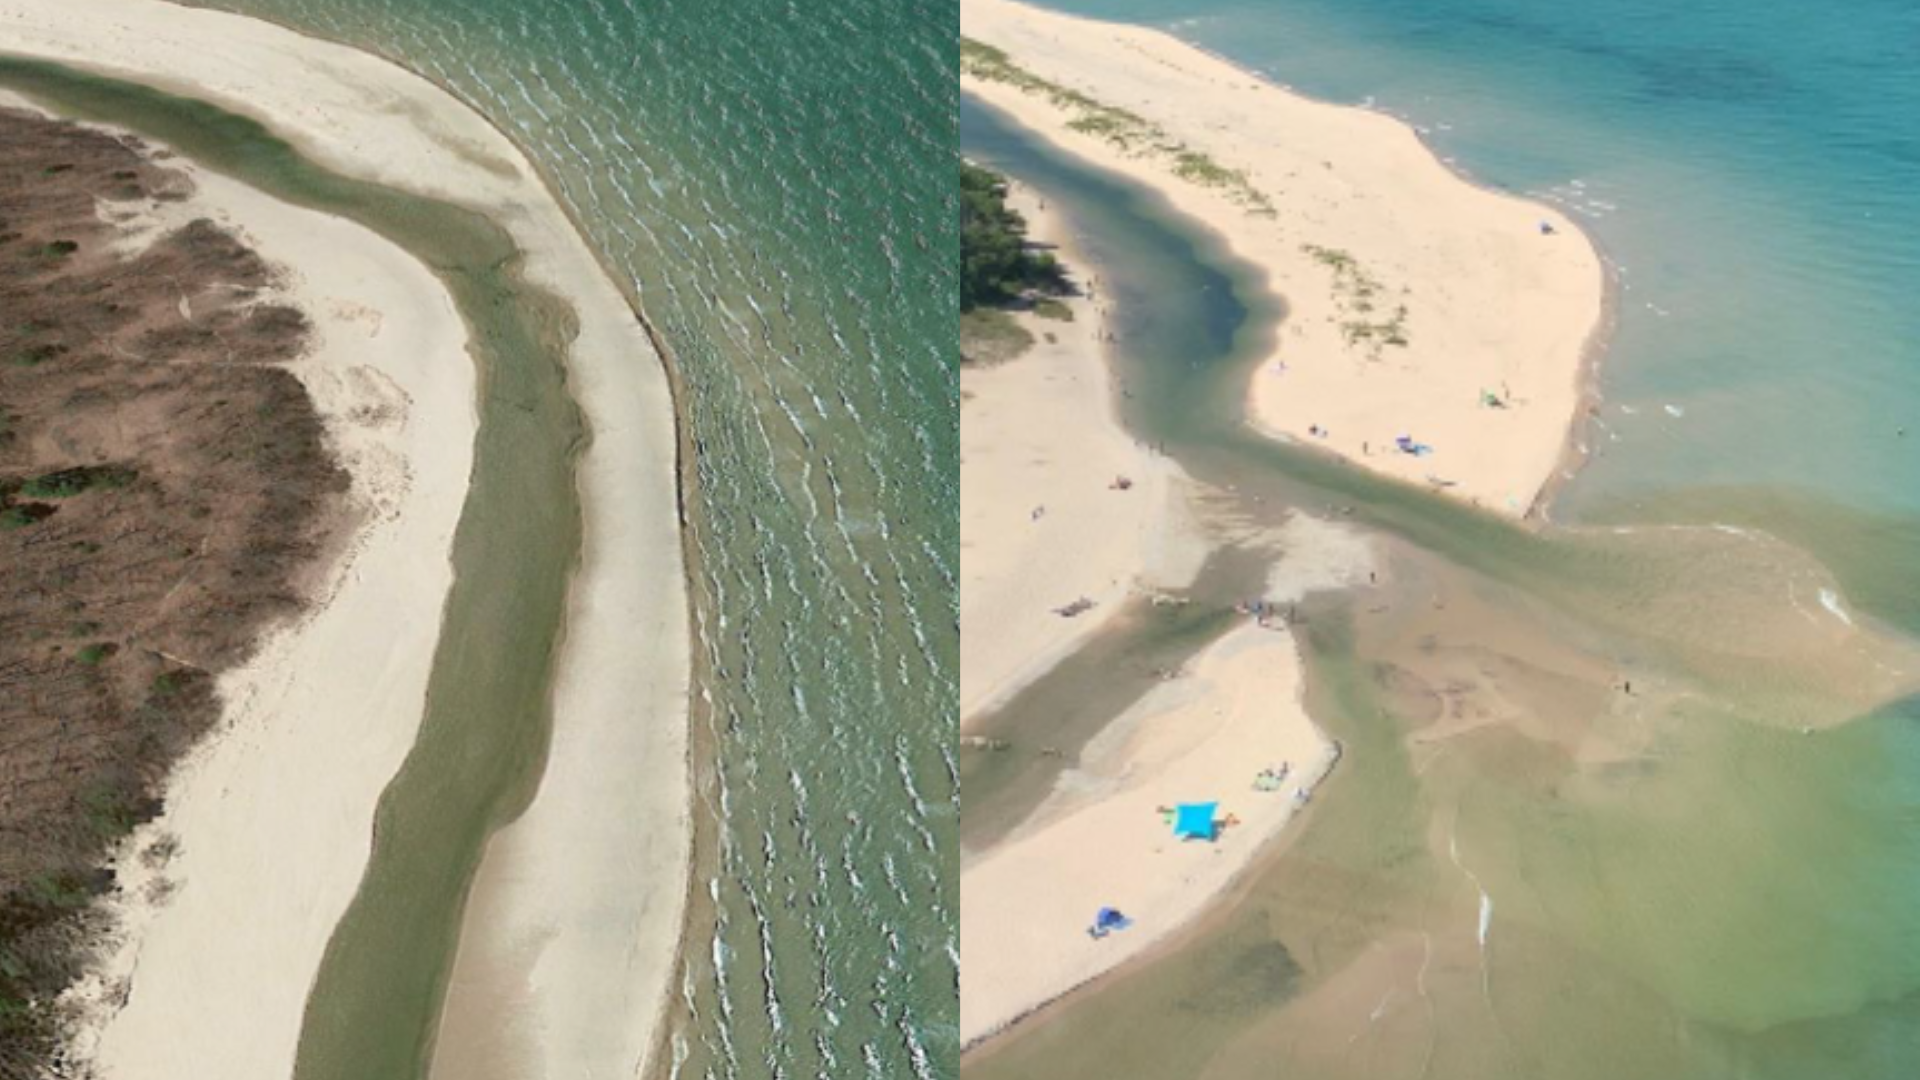 These aerial photographs, taken in May 2022, show the natural flow of the Platte River (left) and the diverted channel emptying directly into Lake Michigan (right) approximately three days later